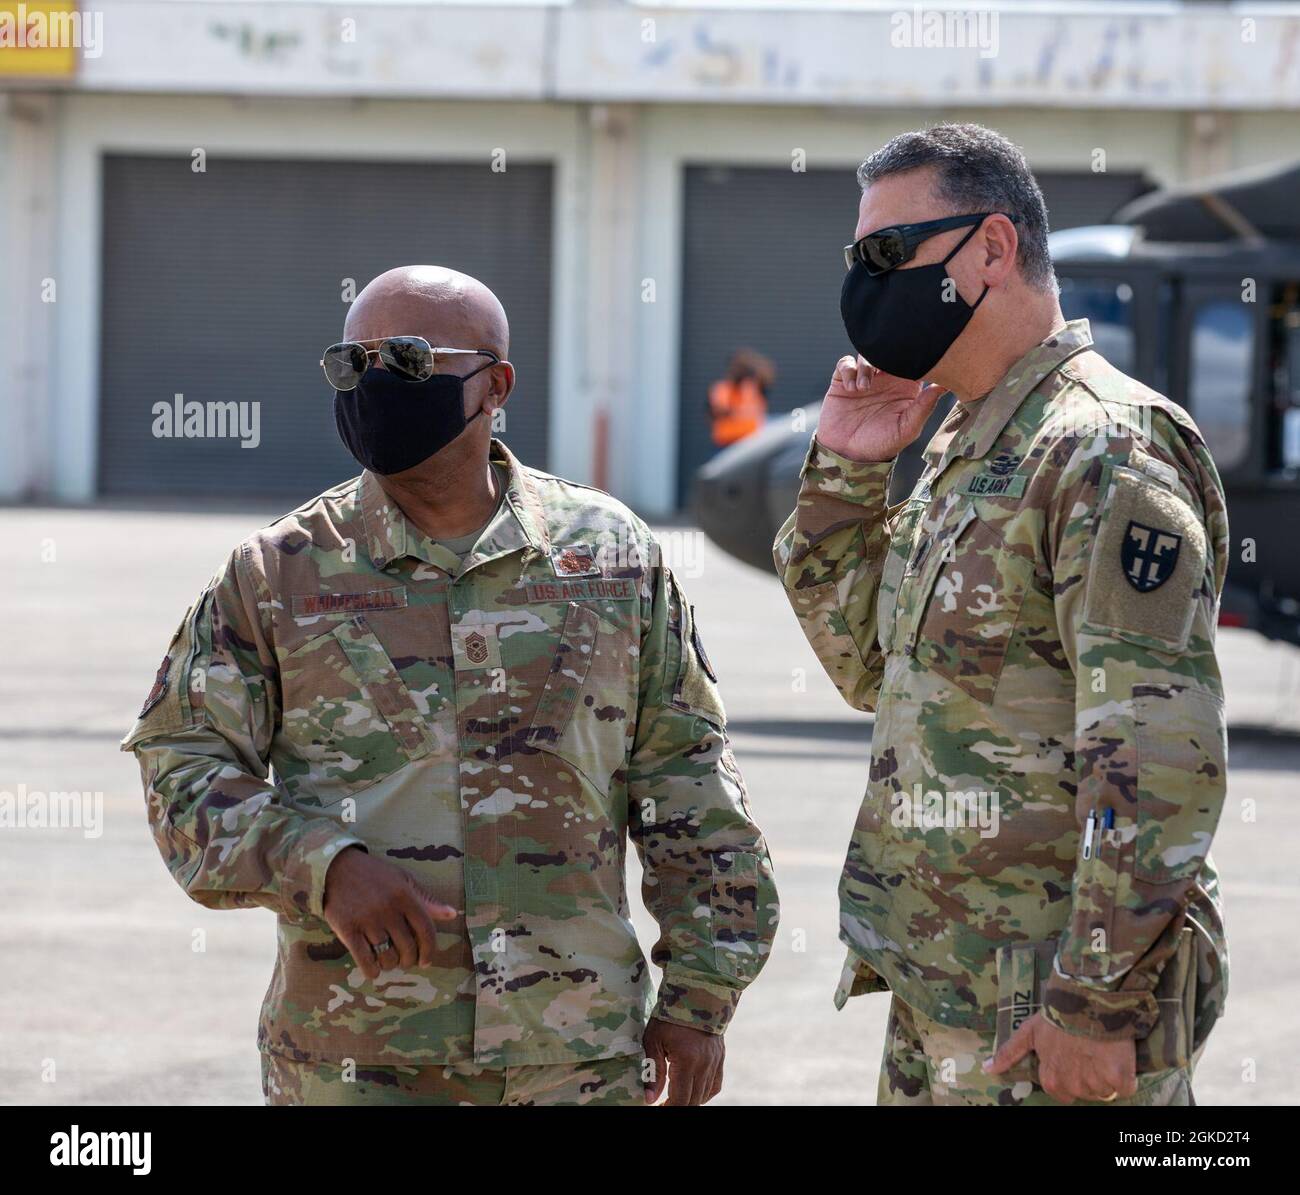 From left, Senior Enlisted Advisor to the Chief, Tony L. Whitehead, and  Command Sergeant Major Andrés Ruiz, and State Command Sergeant Major,  arrive at the Mercedita Airport in Ponce, Puerto Rico, March